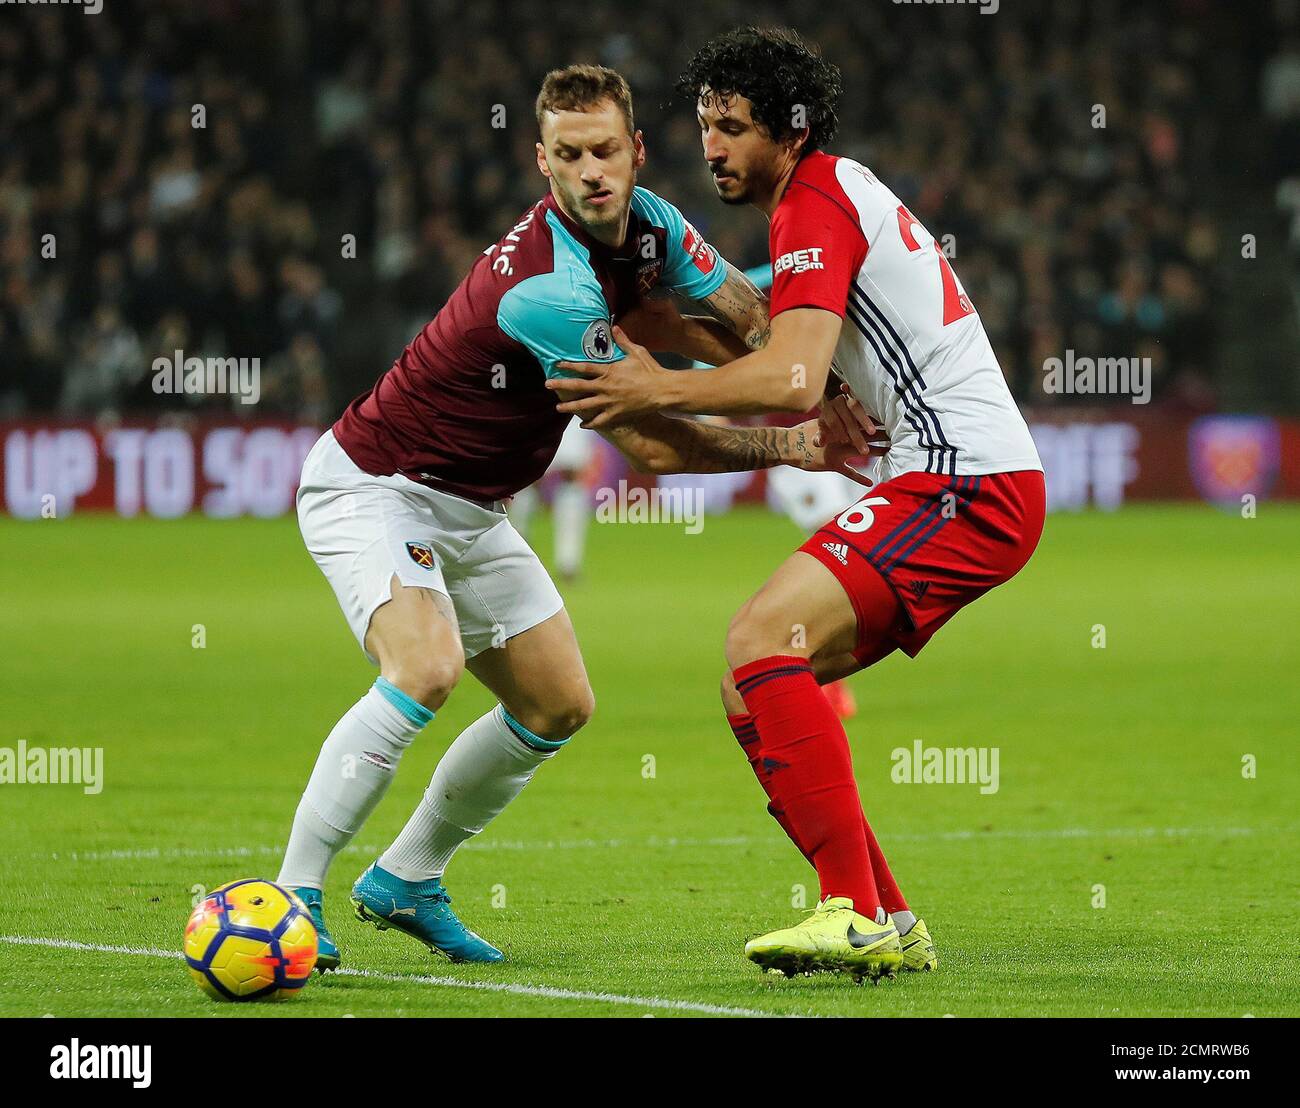 Soccer Football - Premier League - West Ham United vs West Bromwich Albion - London Stadium, London, Britain - January 2, 2018   West Ham United's Marko Arnautovic in action with West Bromwich Albion’s Ahmed Hegazi   REUTERS/Eddie Keogh    EDITORIAL USE ONLY. No use with unauthorized audio, video, data, fixture lists, club/league logos or 'live' services. Online in-match use limited to 75 images, no video emulation. No use in betting, games or single club/league/player publications.  Please contact your account representative for further details. Stock Photo